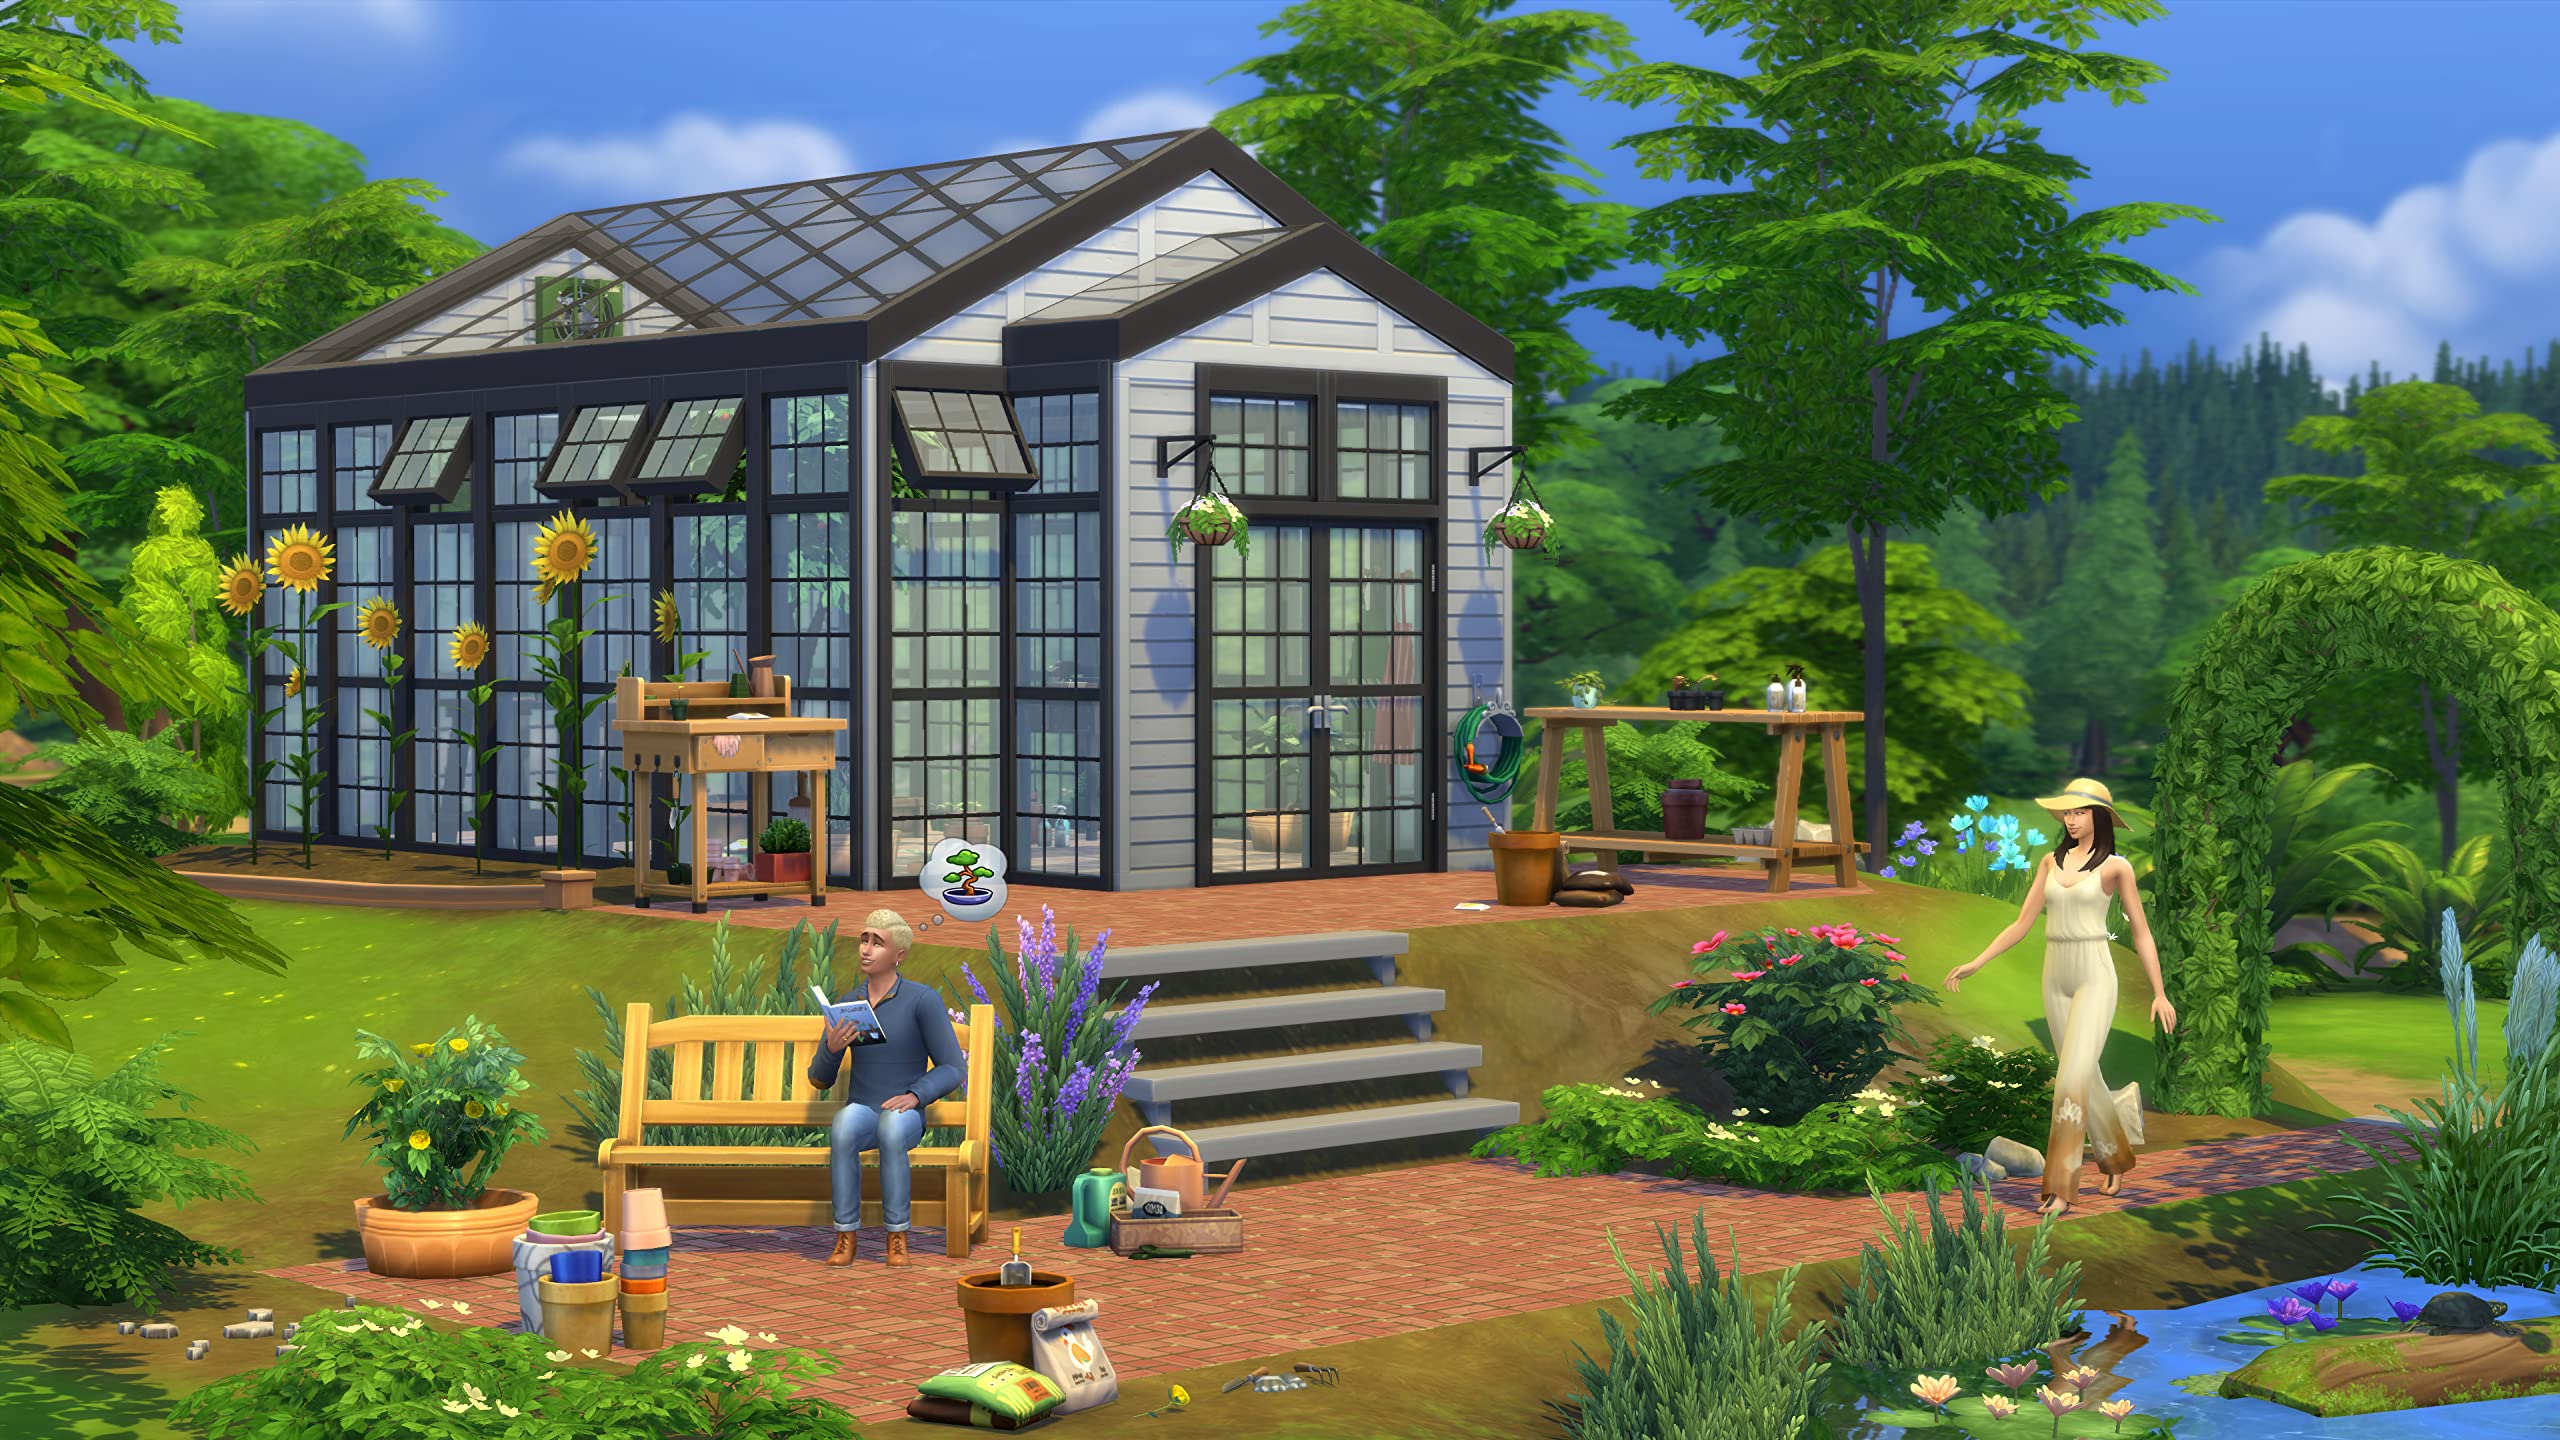 The Sims 4 Greenhouse Haven - PC [Online Game Code]